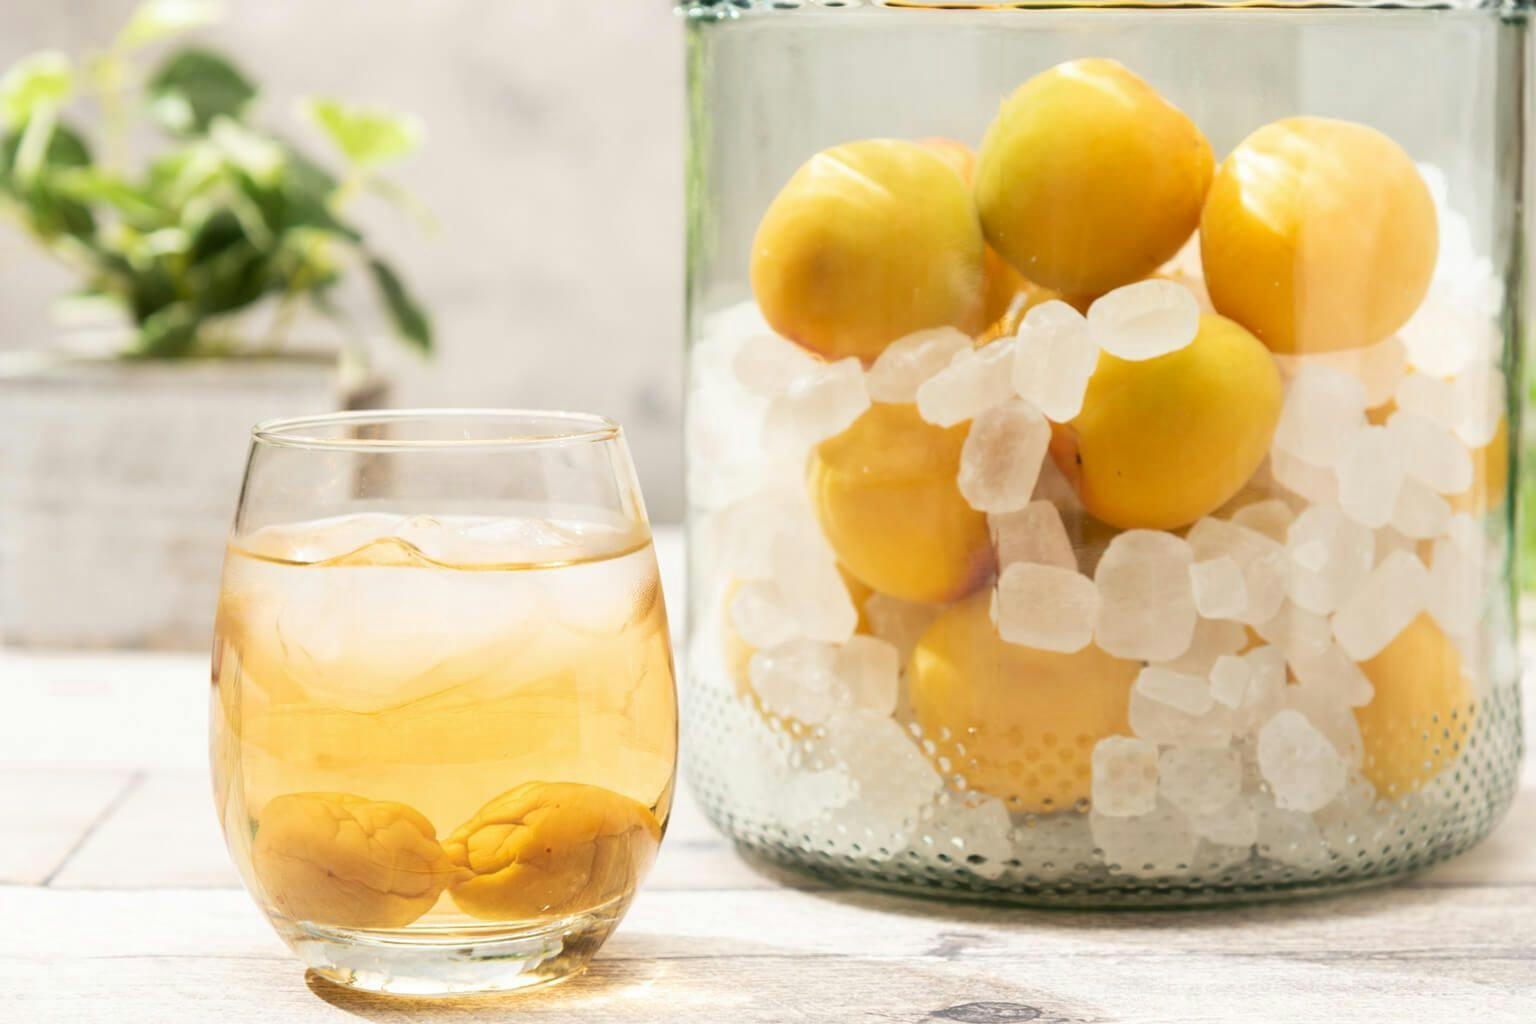 Ume are aged and soaked in alcohol to make homemade umeshu